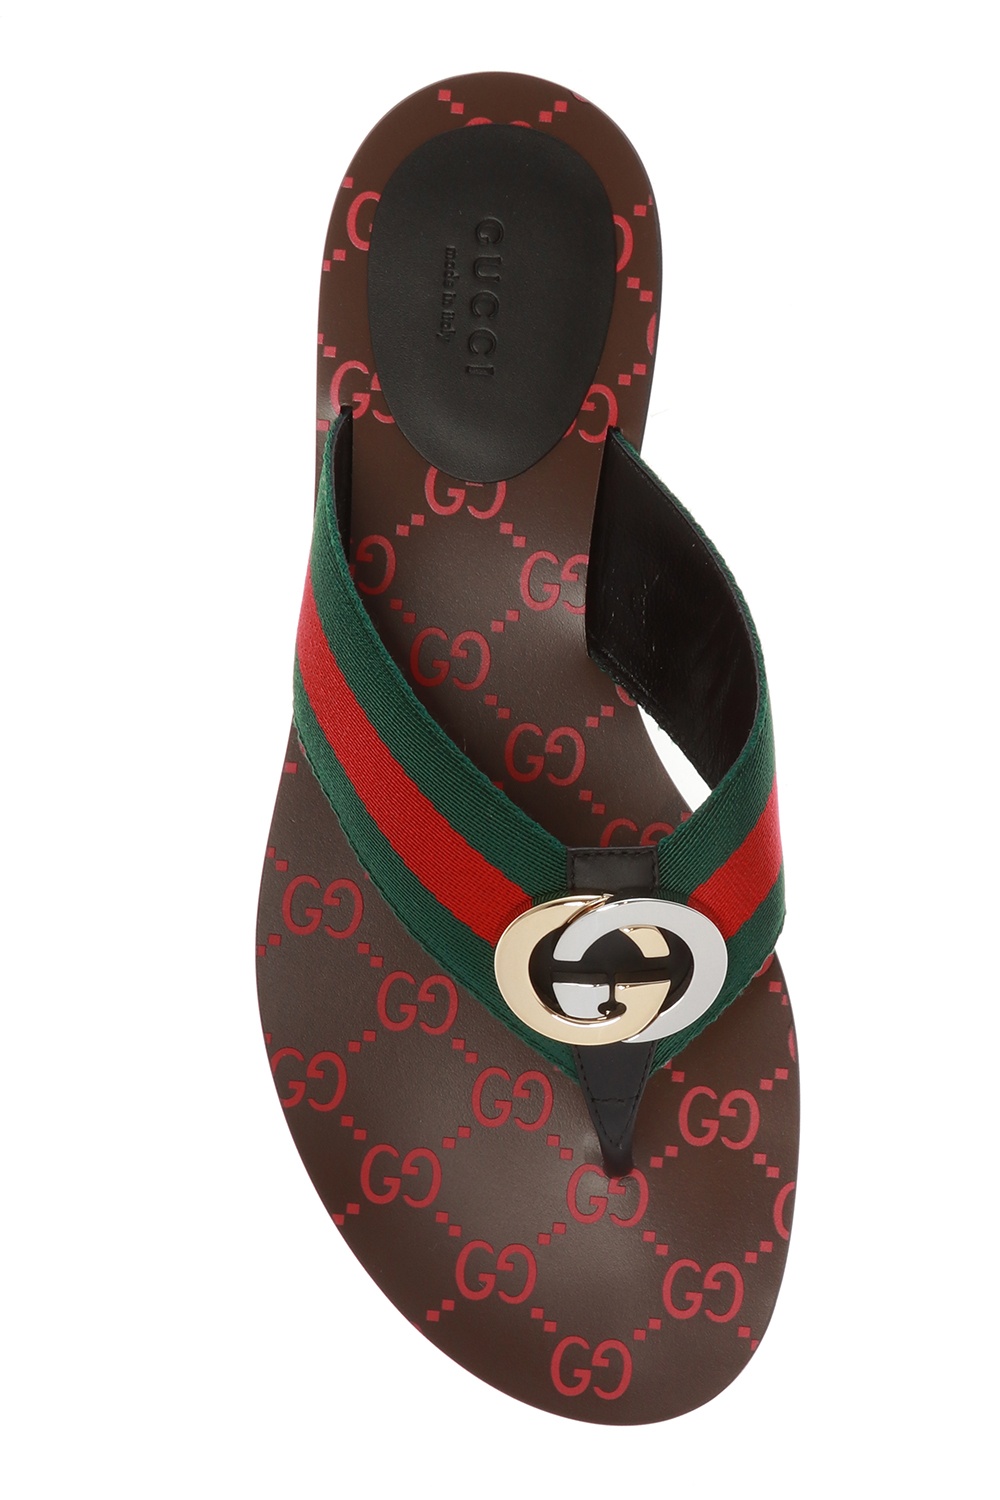 show me a picture of gucci flip flops